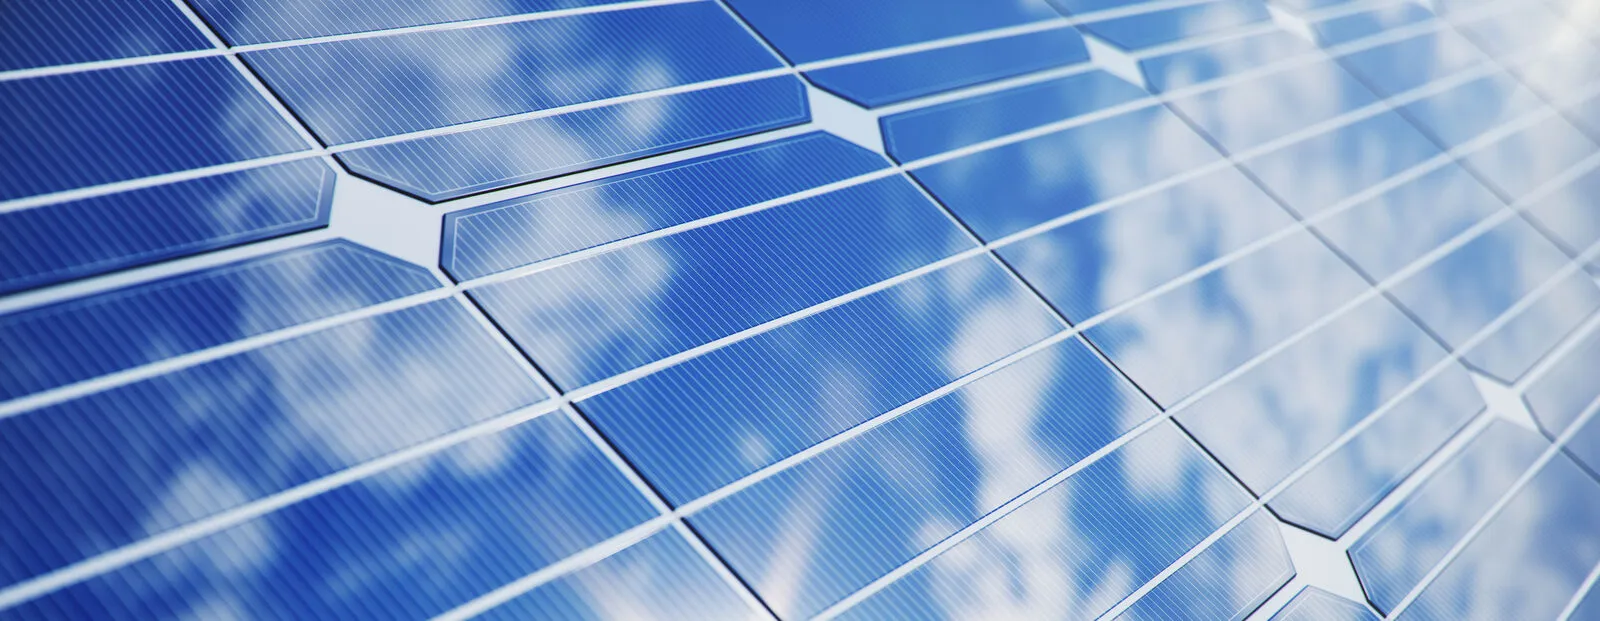 3D illustration solar Panels close-up. Alternative energy. Concept of renewable energy. Ecological, clean energy. Solar panels, photovoltaic with reflection beautiful blue sky..jpg